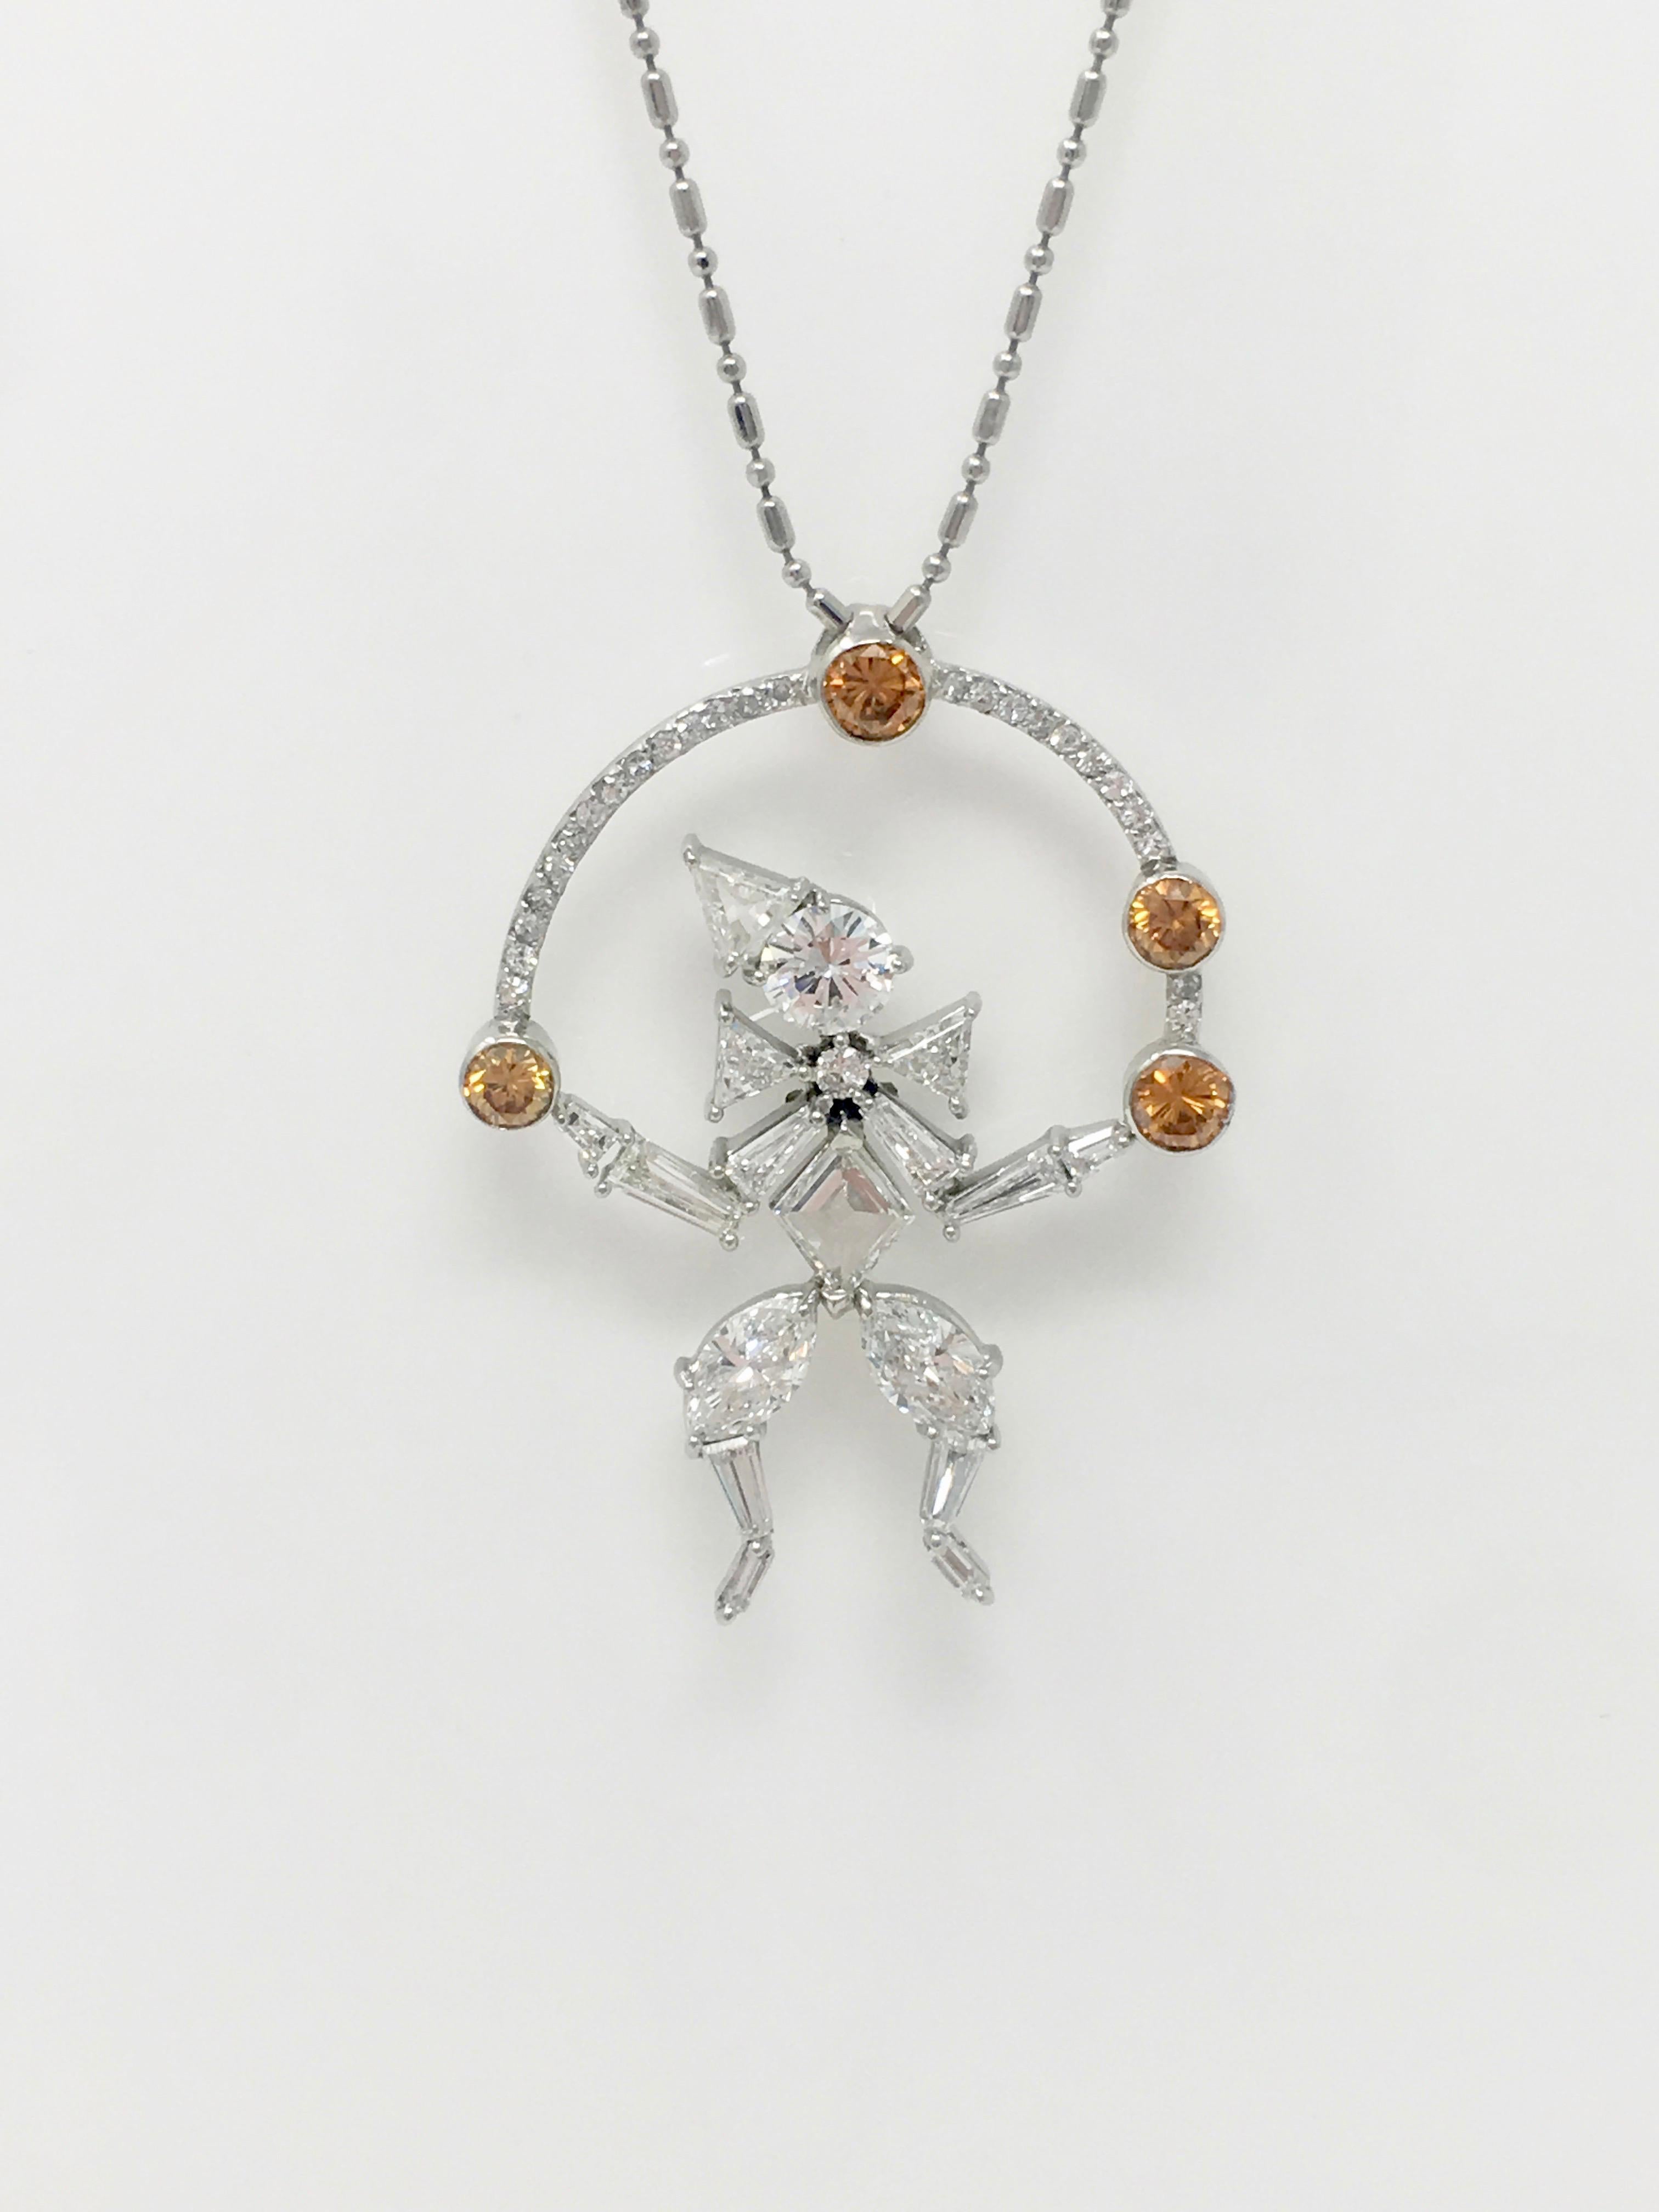 Contemporary 2.97 Carat White And Brown Diamond Juggling Clown Necklace In Platinum. For Sale